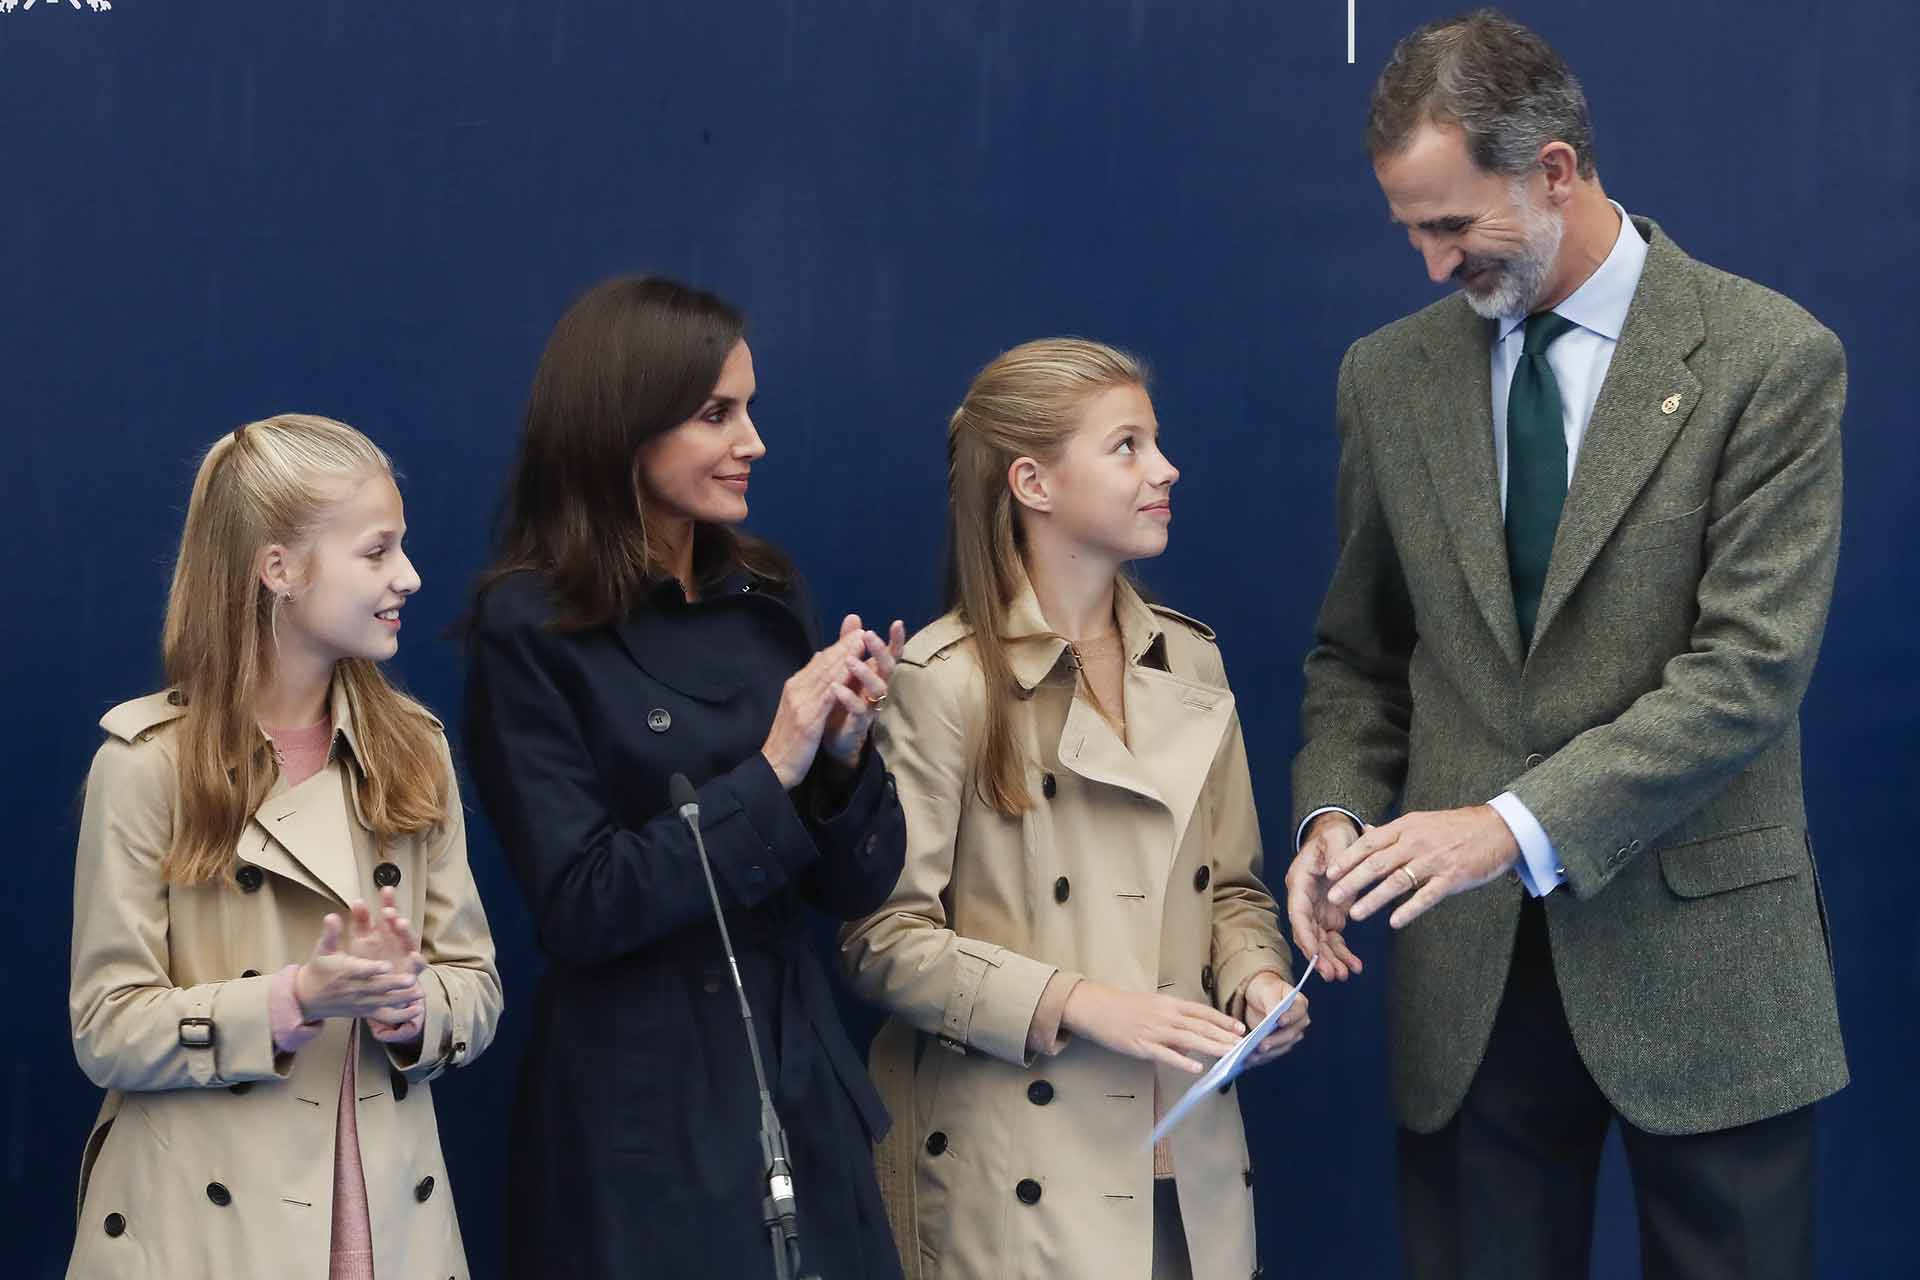 Spanish King Felipe VI and Queen Letizia Ortiz with daughters Princess of Asturias Leonor de Borbon and Sofia de Borbon during a visit to Asiego (Concejo Cabrales) as winner of the 30th annual Exemplary Village of Asturias Award, Spain, on Saturday 19 October, 2019.